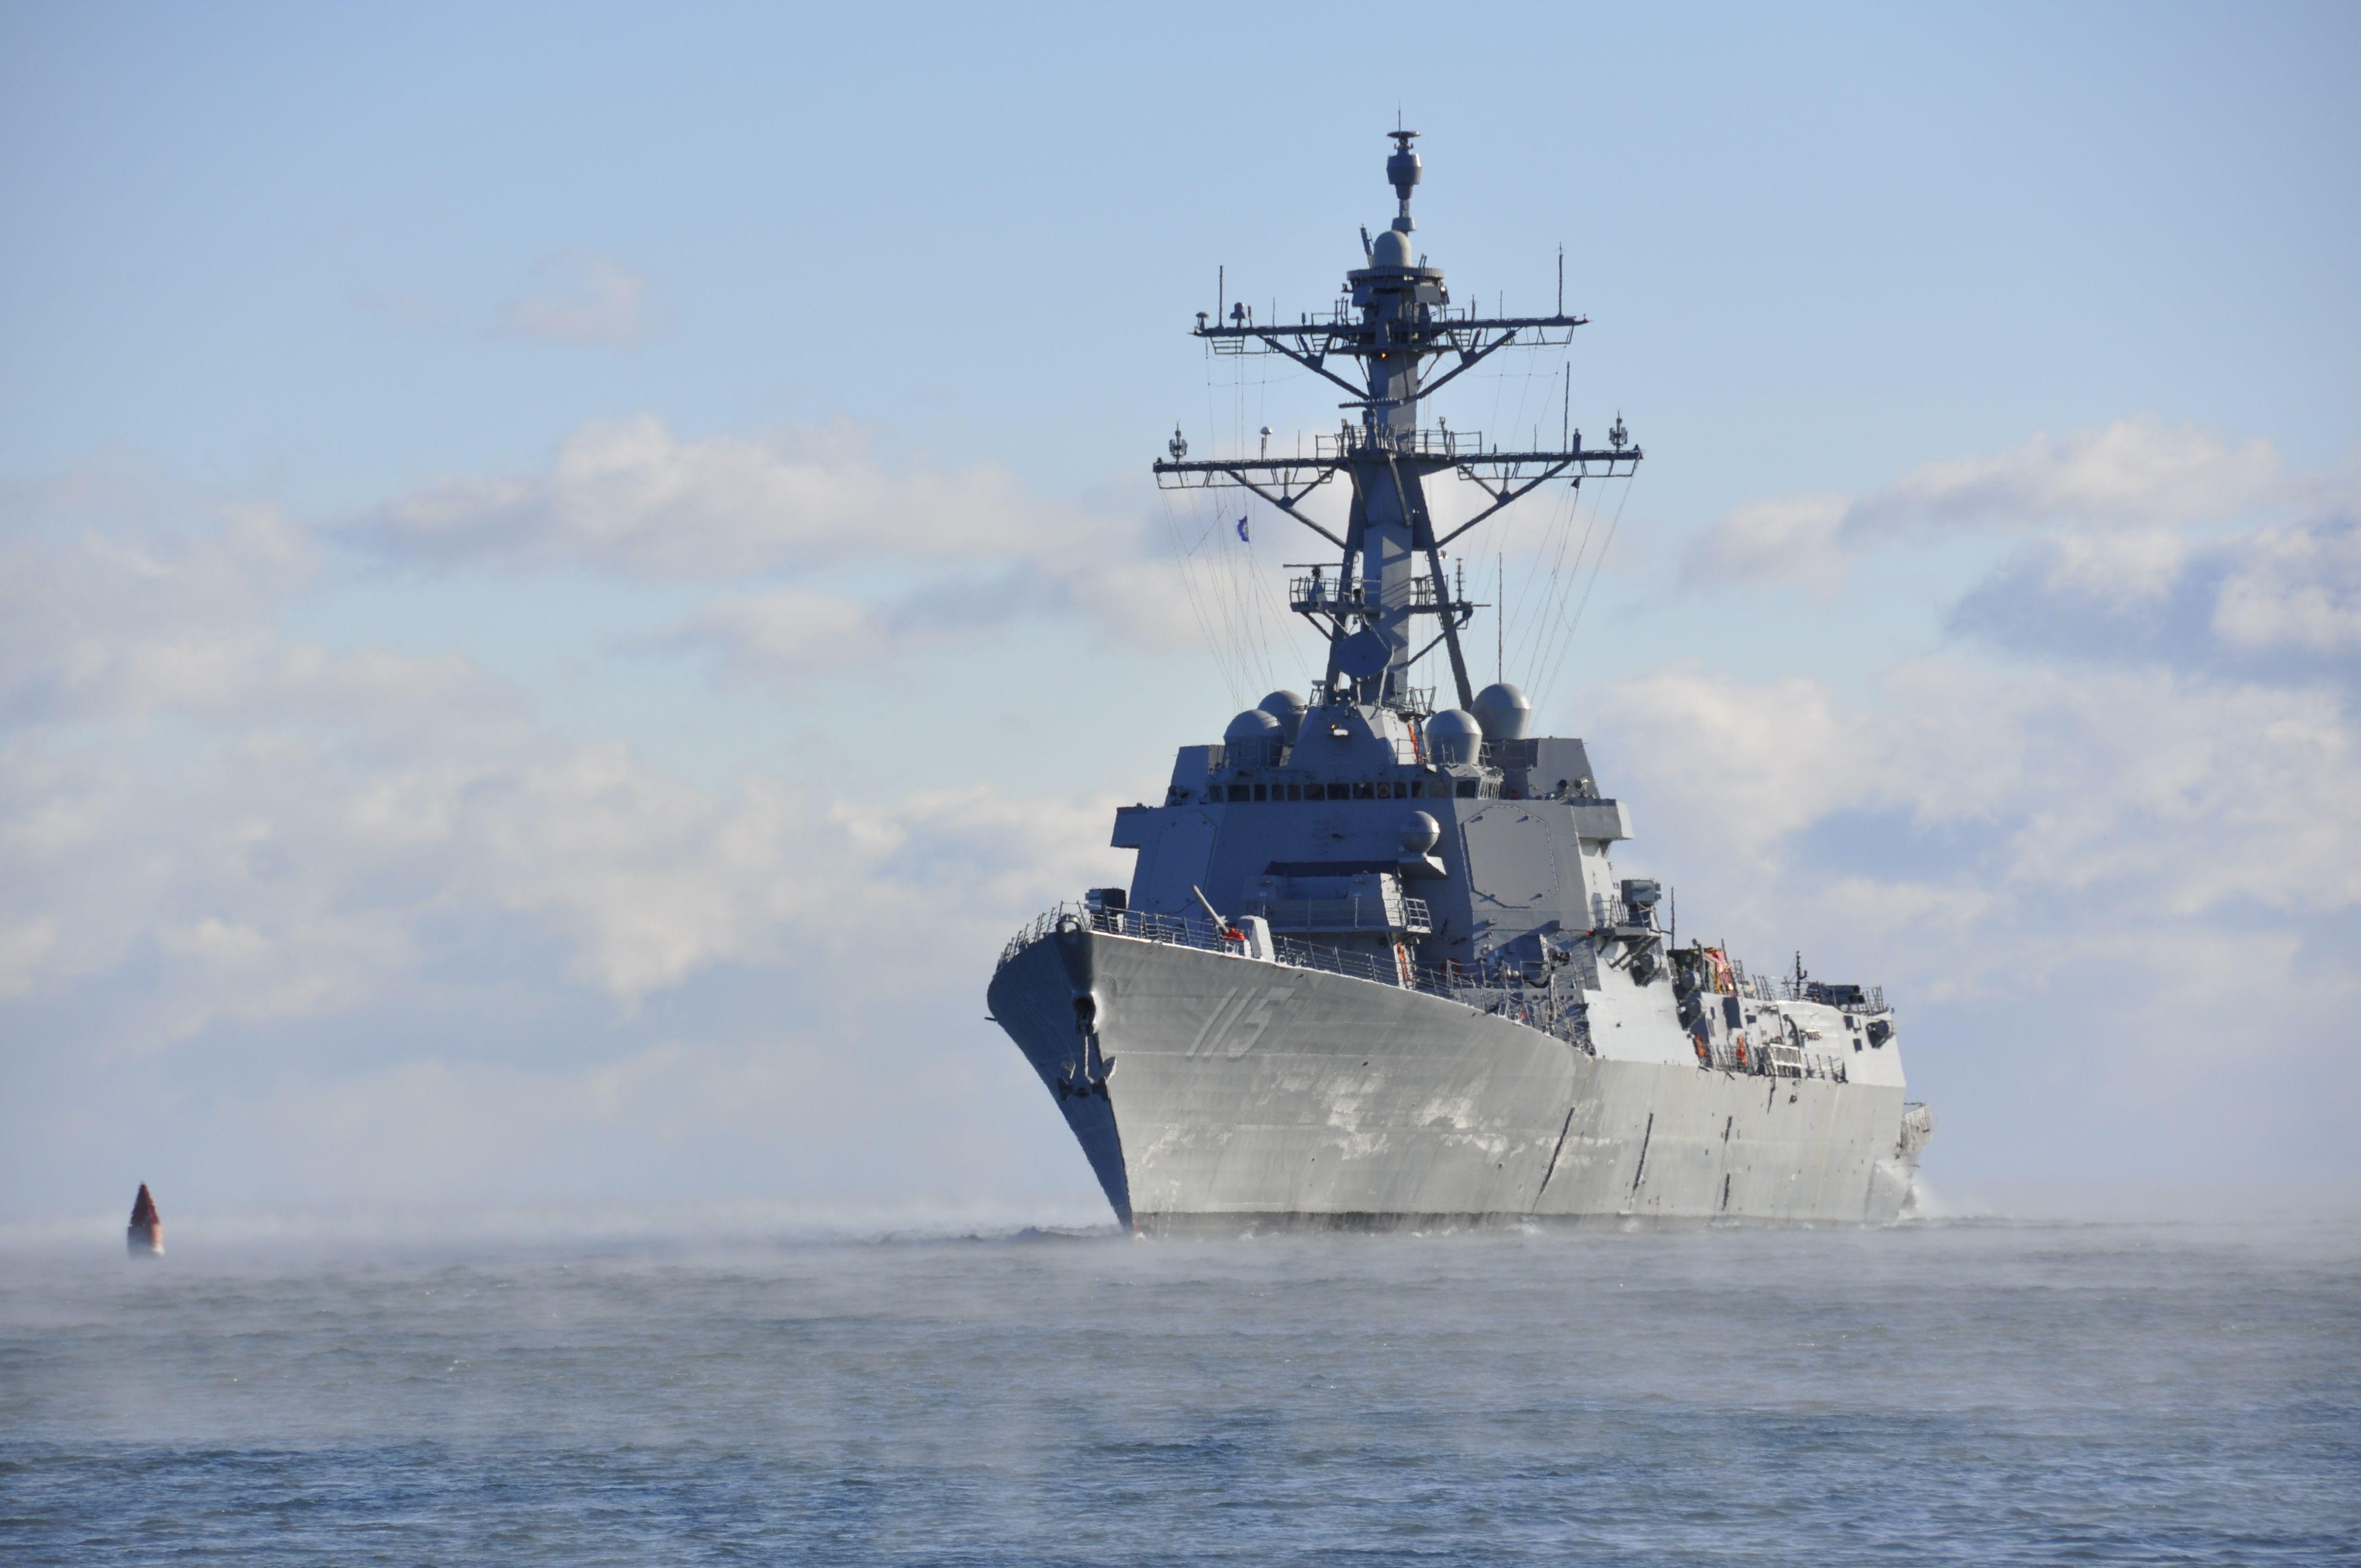 Rafael Peralta (DDG 115) Successfully Completed Acceptance Trials